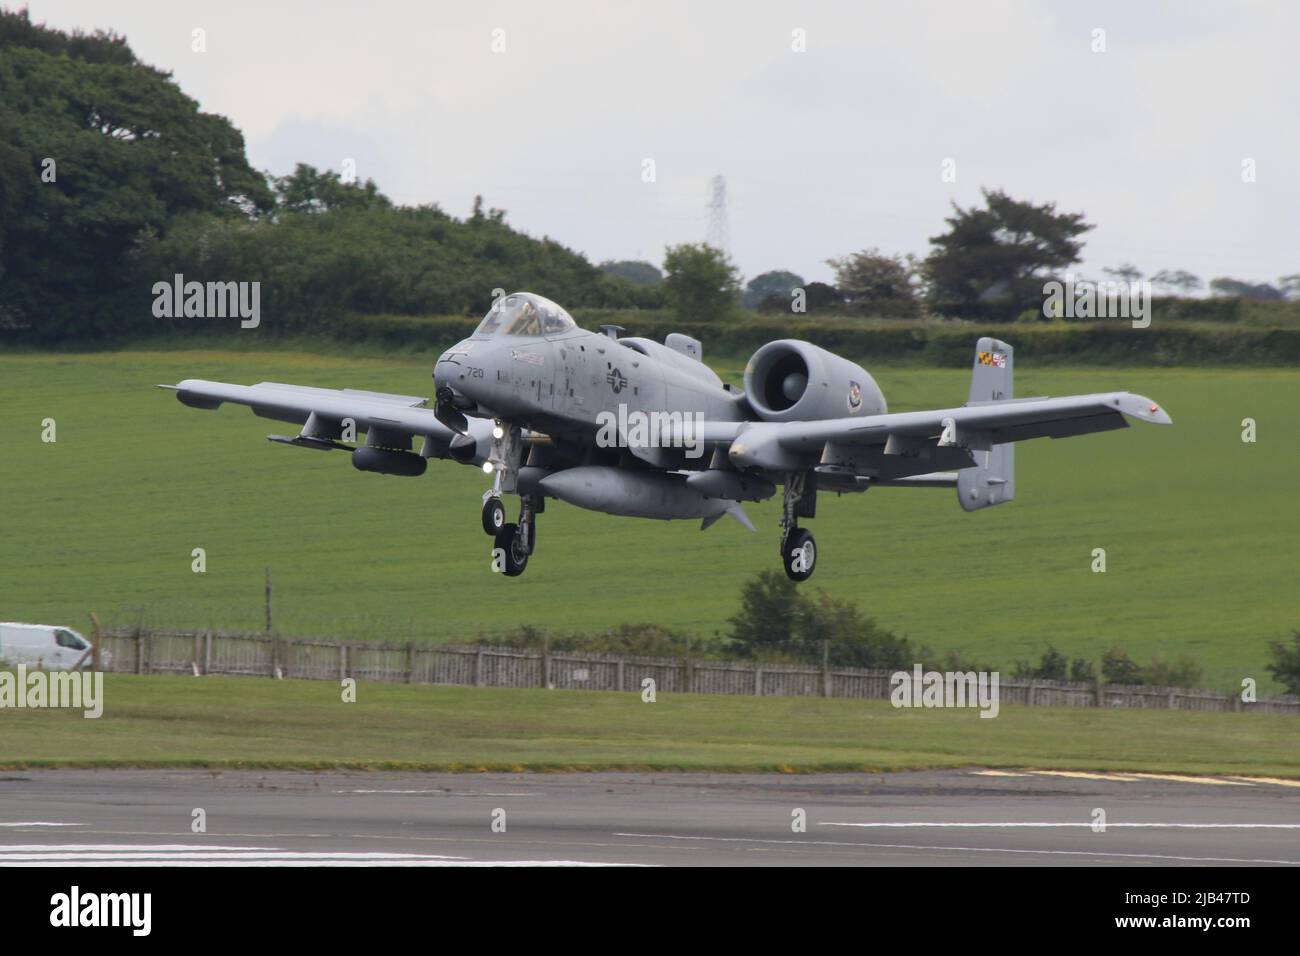 78-0720, a Fairchild Republic A-10C Thunderbolt II (or Warthog) operated by the 175th Wing of the Maryland Air National Guard of the United States Air Force, arriving at Prestwick International Airport in Ayrshire. The aircraft was one of ten A-10Cs routing through Prestwick on their journey from Latvia back to the USA, after participating in Exercise Swift Response. Stock Photo